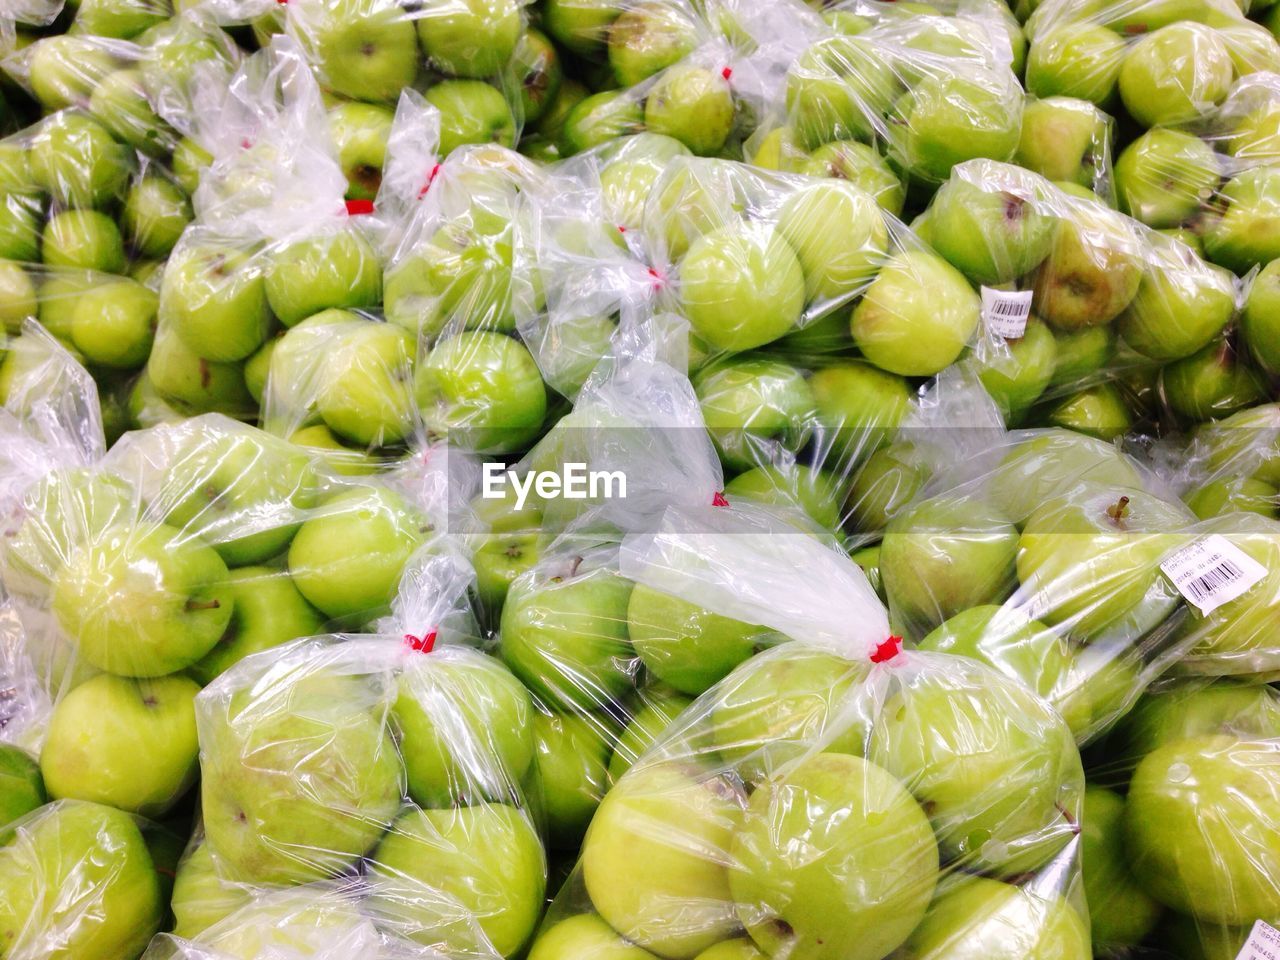 Full frame shot of granny smith apples packed in plastic at market for sale